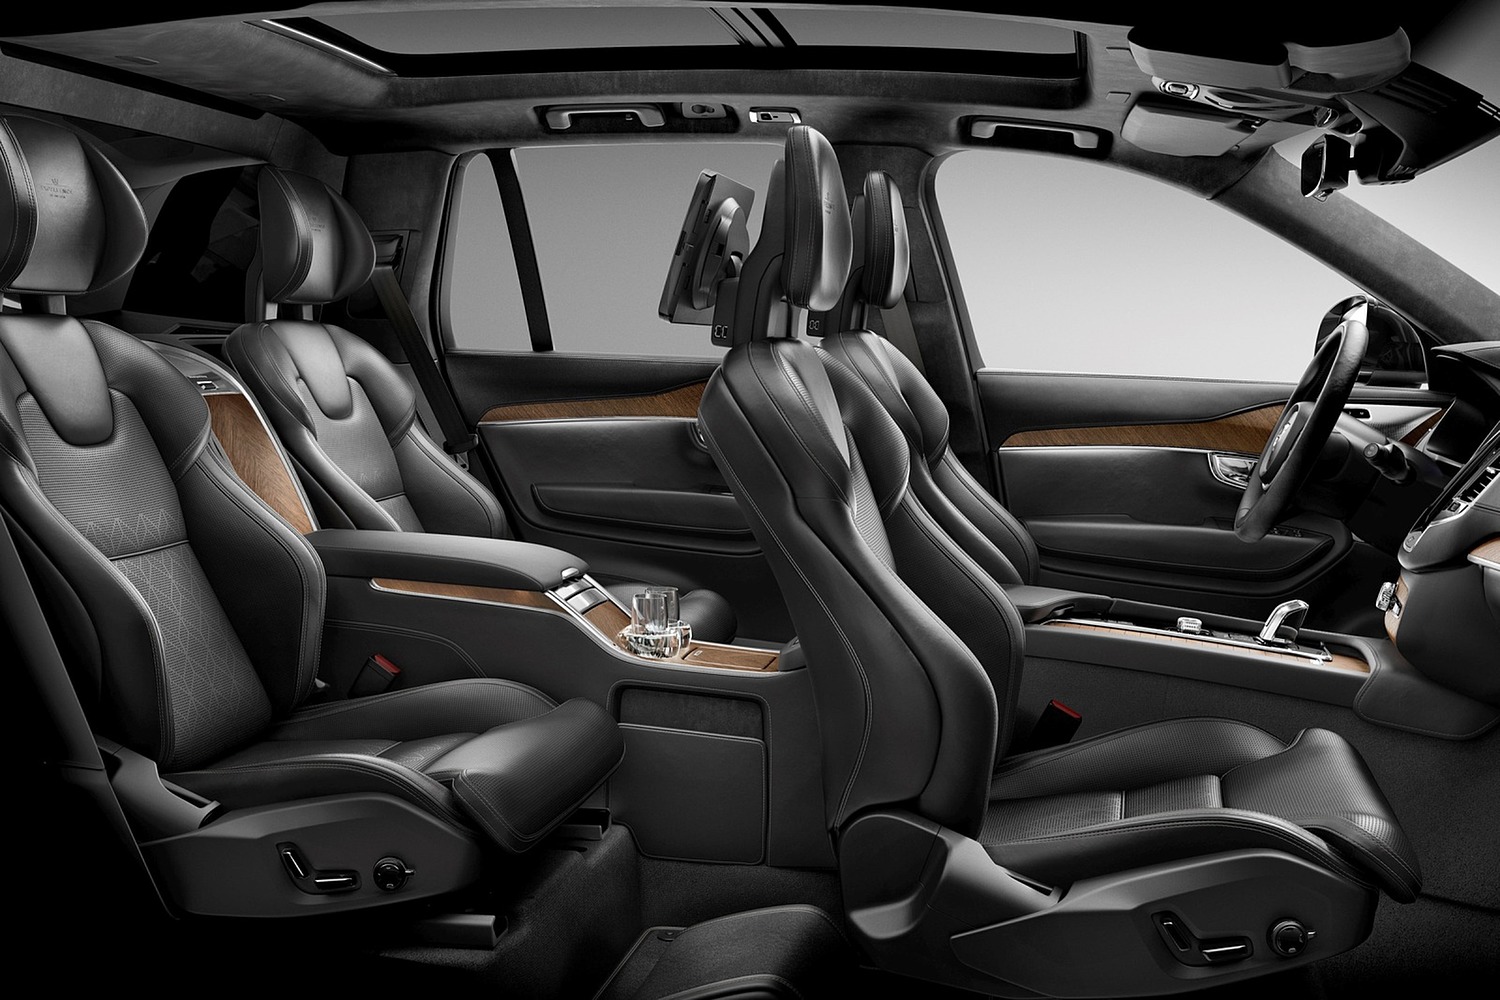 Volvo XC90 T8 Excellence Twin Engine Plug-In Hybrid 4dr SUV Interior (2017 model year shown)